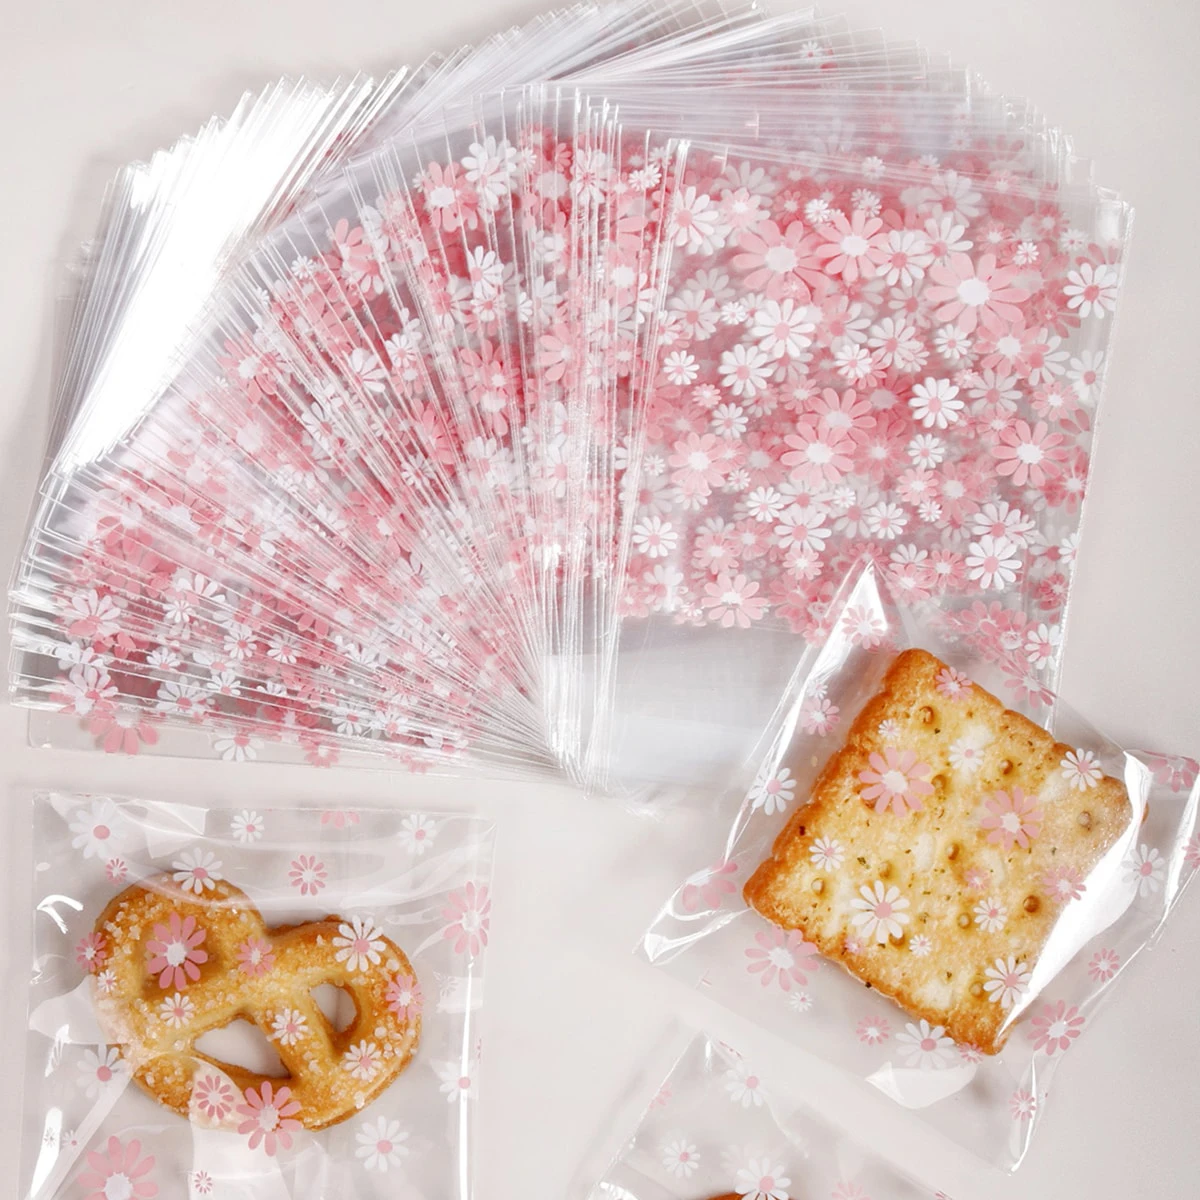 100pcs Plastic Packing Bags Flower Self-Adhesive Bags for Biscuits Candy Cookies Jewelry Gift Packaging